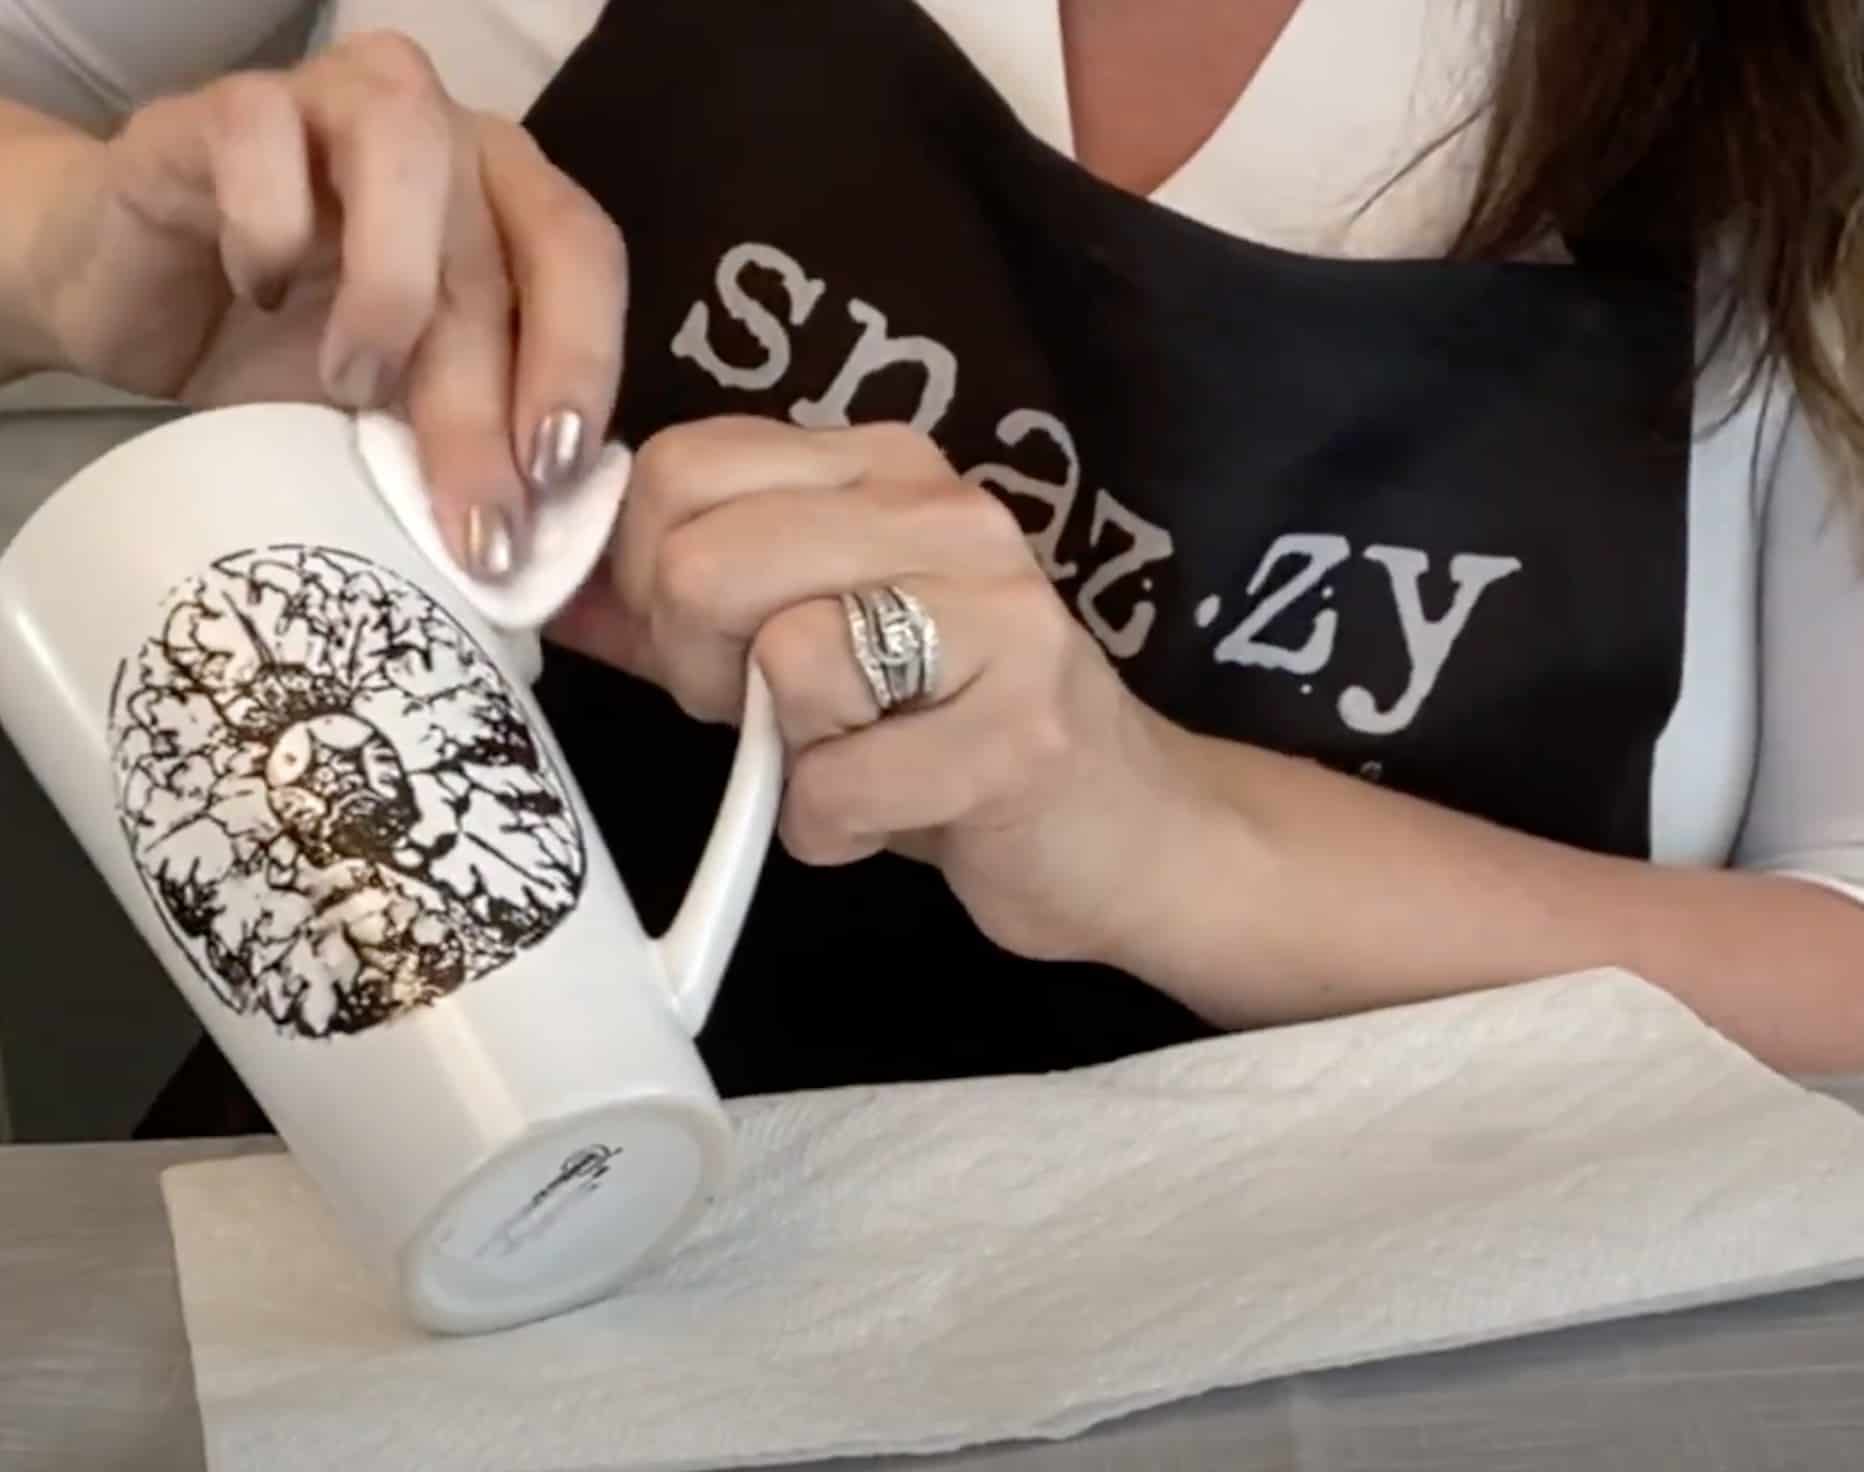 How to Paint Glass Coffee Mugs Permanently with Video Tutorial